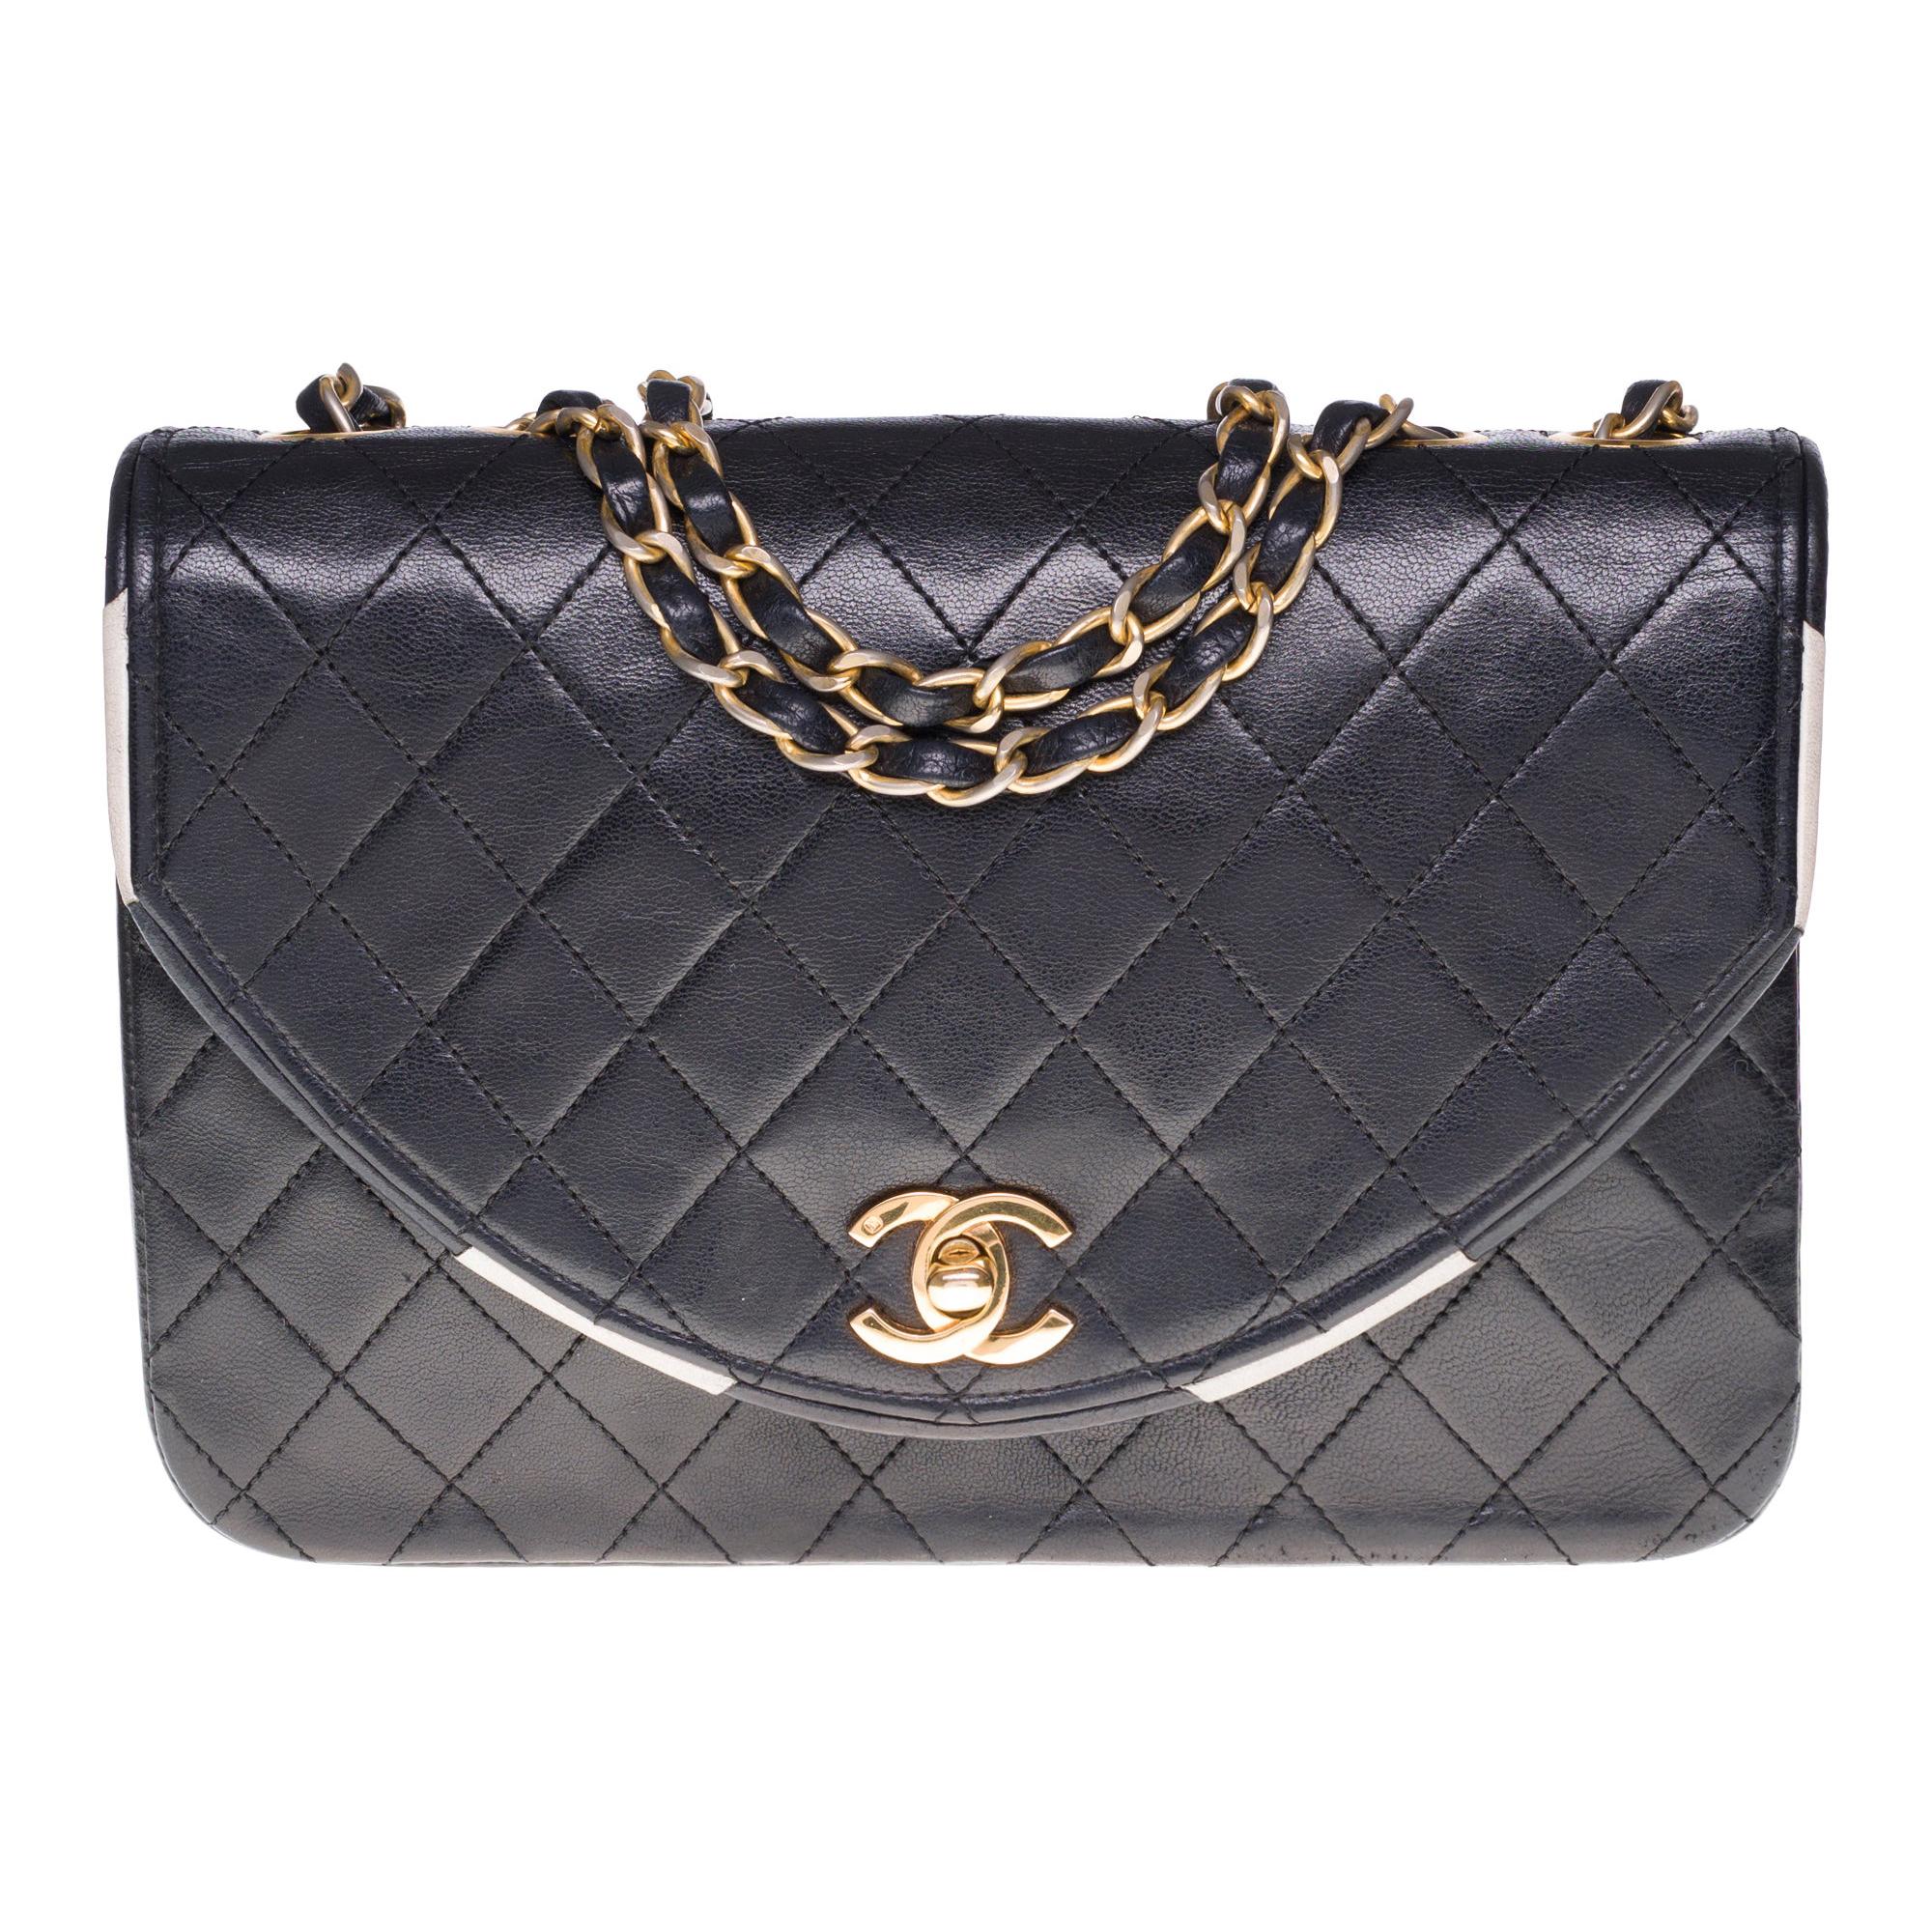 The Coveted Chanel Timeless 23cm Shoulder bag in black quilted lambskin and GHW